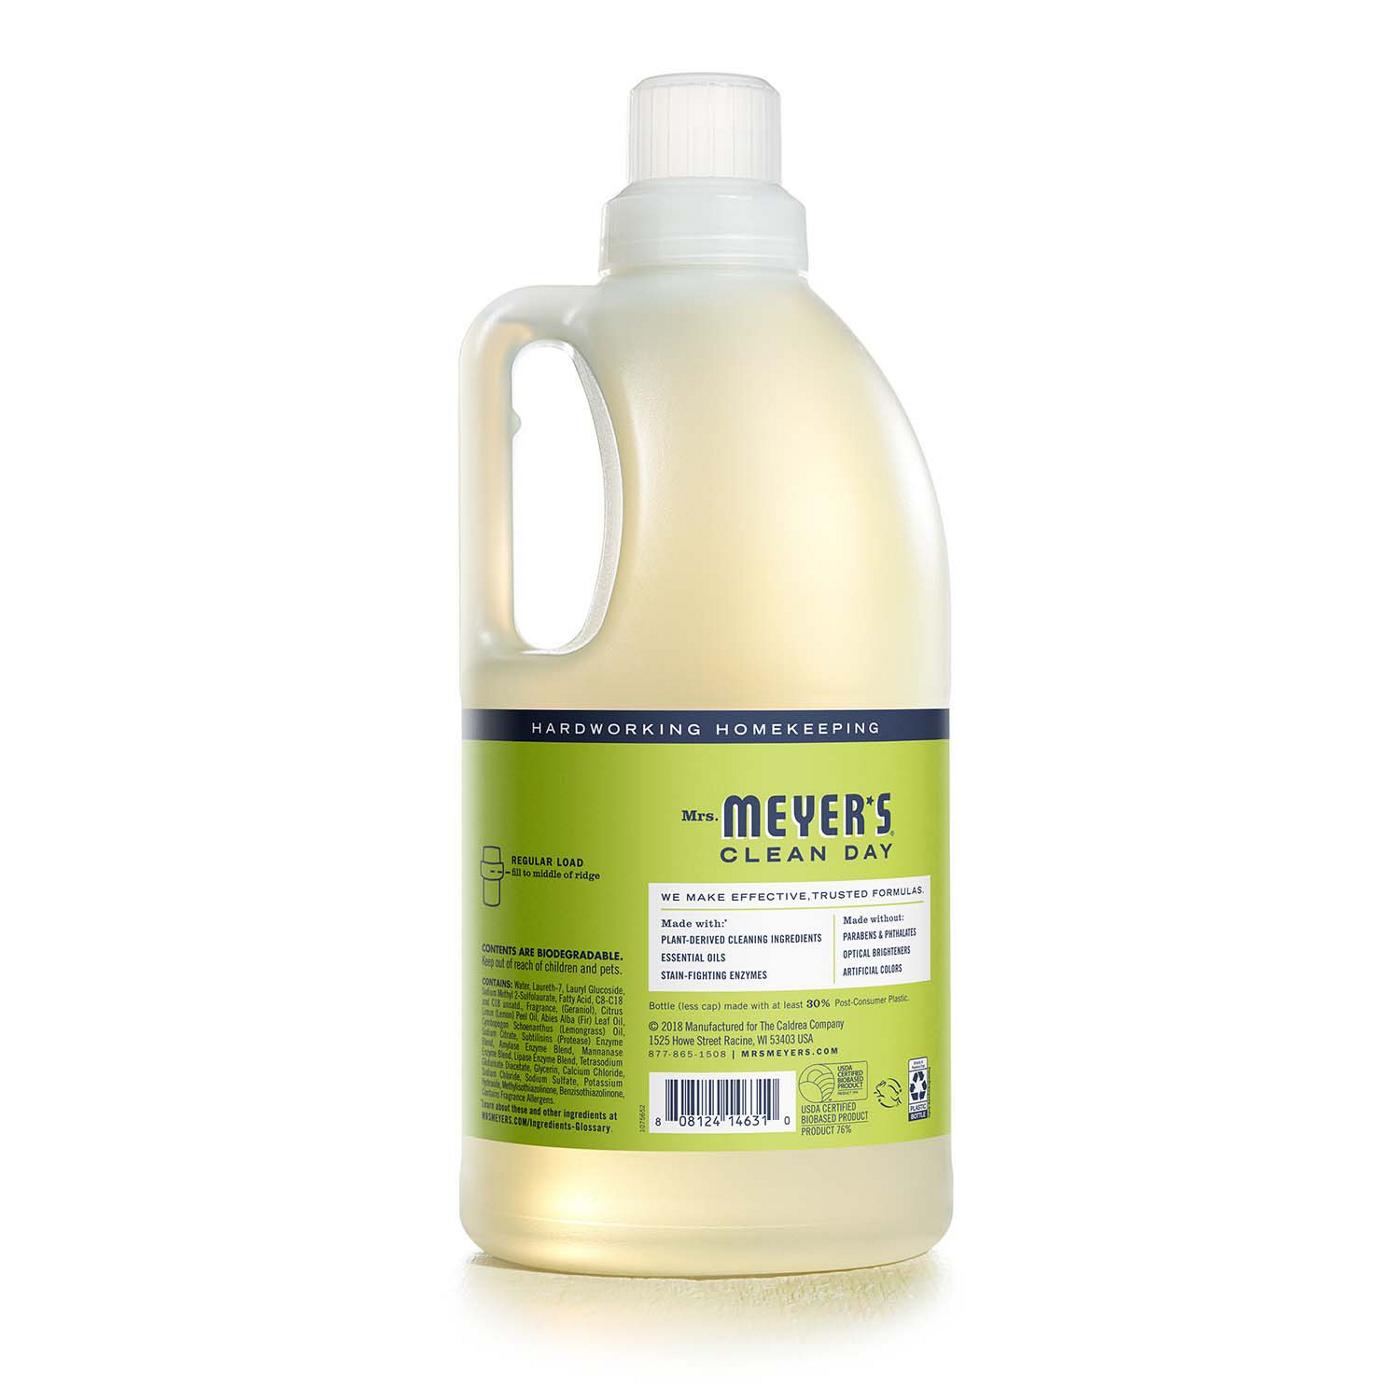 Mrs. Meyer's Clean Day Lemon Verbena Scent Concentrated Laundry Detergent, 64 Loads; image 4 of 5